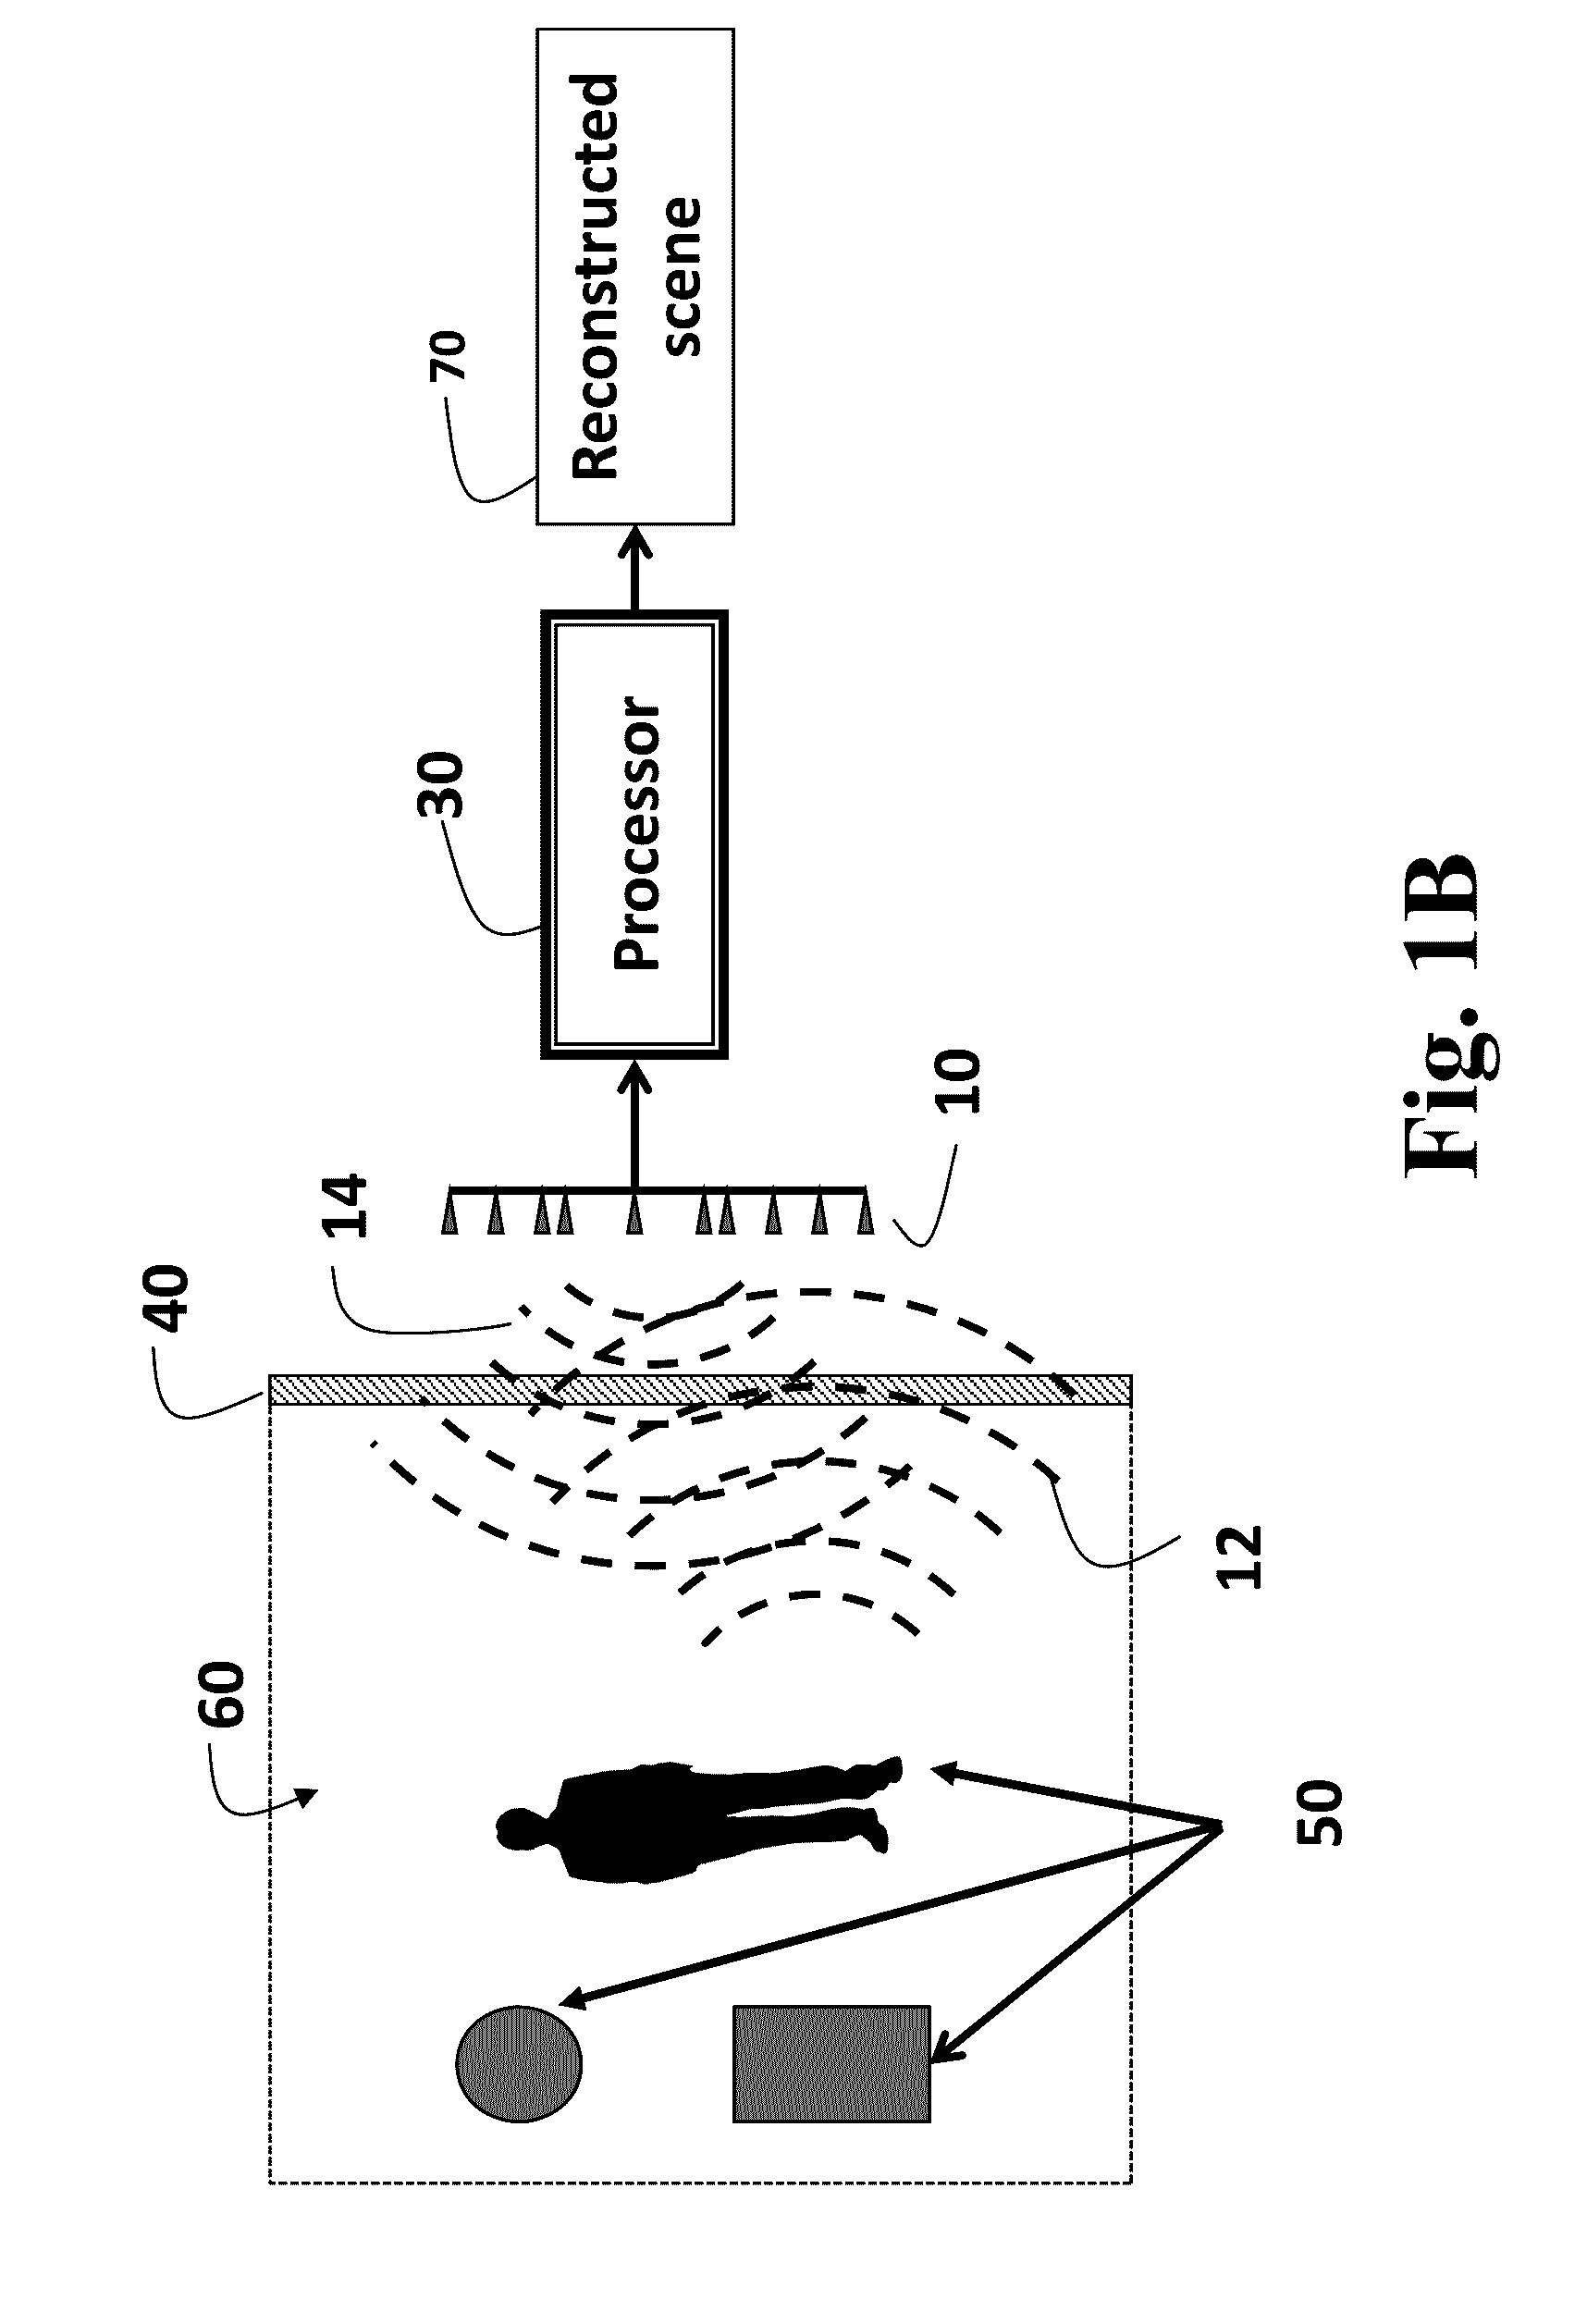 Method and System for Through-the-Wall Radar Imaging